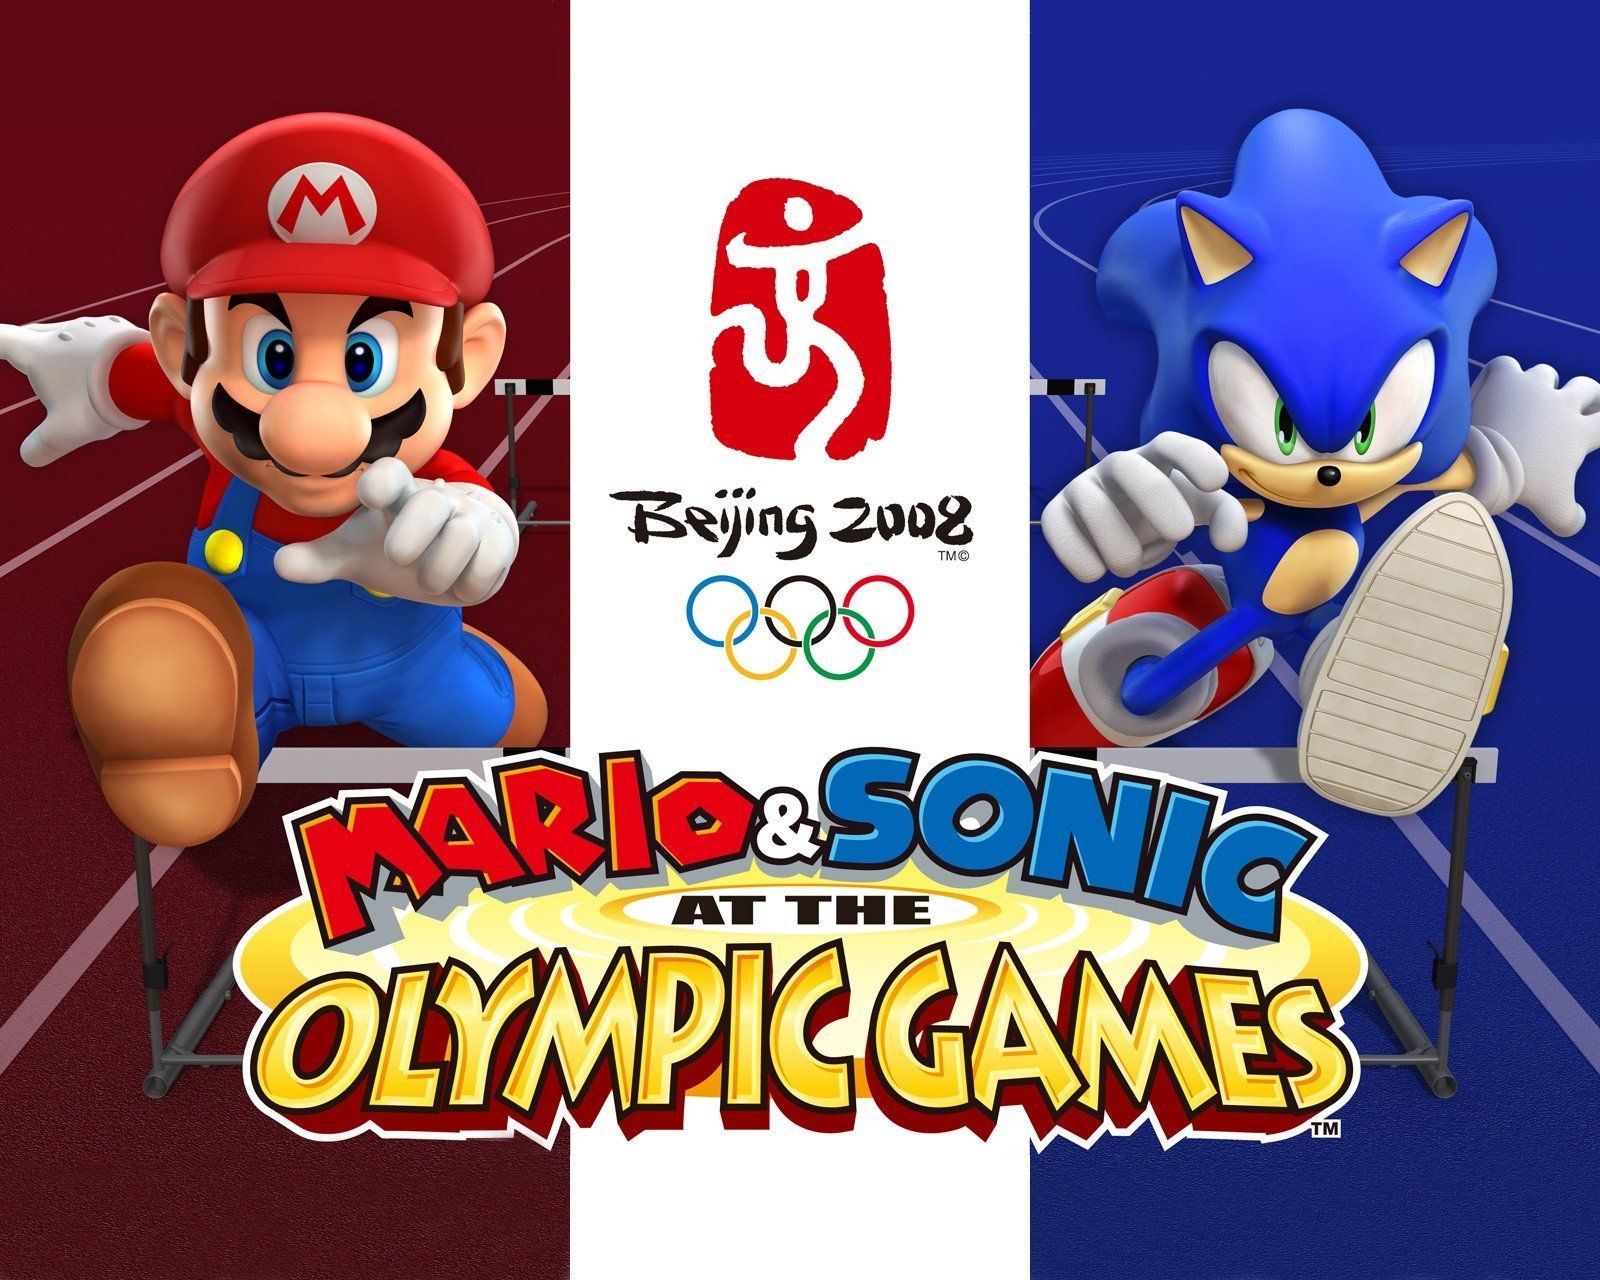 Mario & Sonic at the Olympic Games HD Wallpaper and Background Image